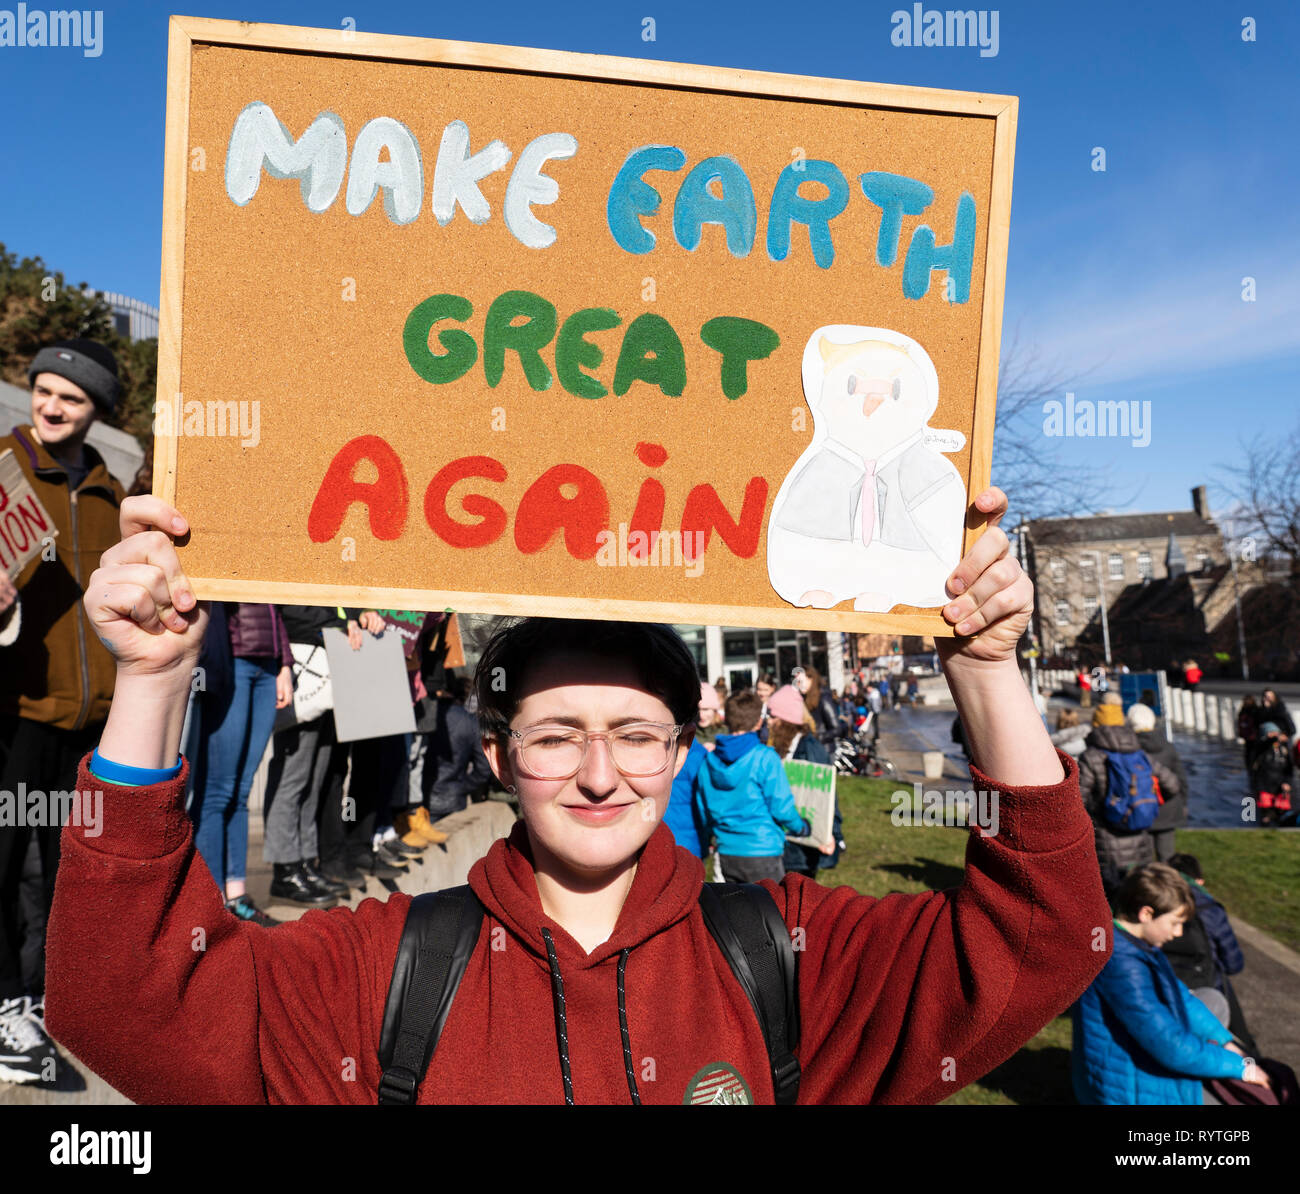 Edinburgh, Scotland, UK. 15th Mar, 2019. Students and school children who controversially are on strike from school take part in a School Strike 4 Climate demonstration outside the Scottish Parliament in Holyrood, Edinburgh. Credit: Iain Masterton/Alamy Live News Stock Photo